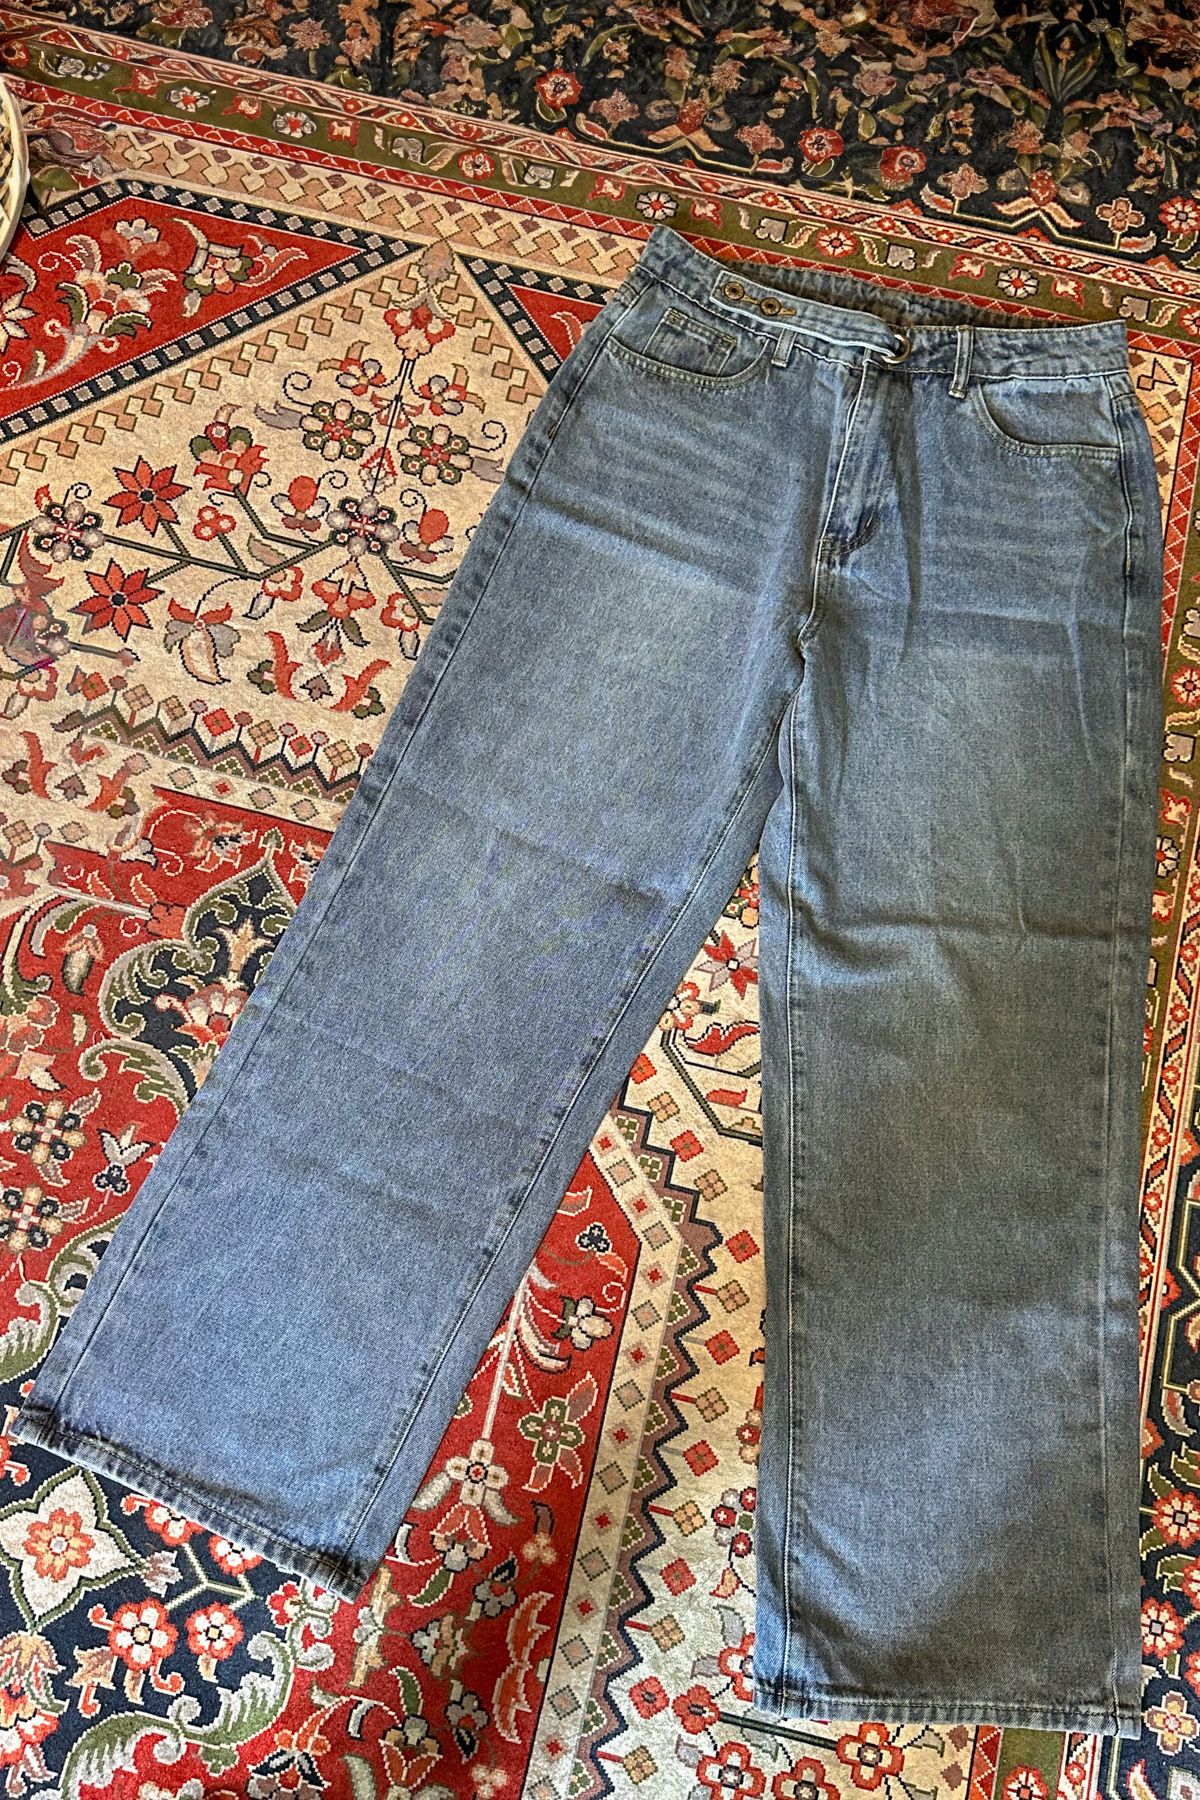 A pair of wide leg jeans lying flat on a red, white, and blue oriental rug.